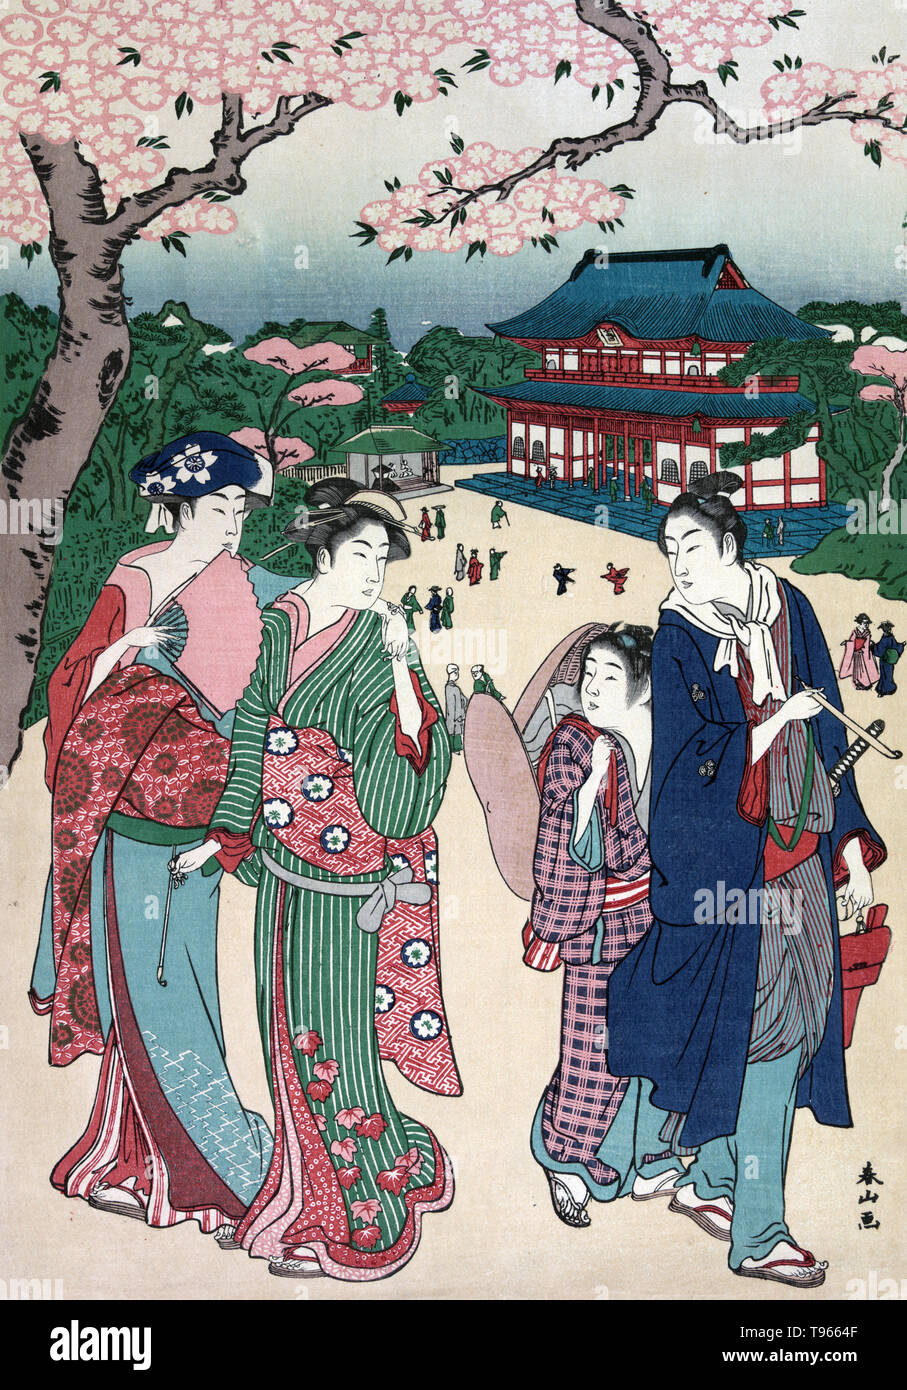 Ueno no hanami. Cherry blossom viewing at Ueno.  Print shows a man, two women, and a young child viewing cherry blossoms. A cherry blossom (commonly known in Japan as sakura) is the flower of any of several trees of genus Prunus, particularly the Japanese cherry, Prunus serrulata. Stock Photo